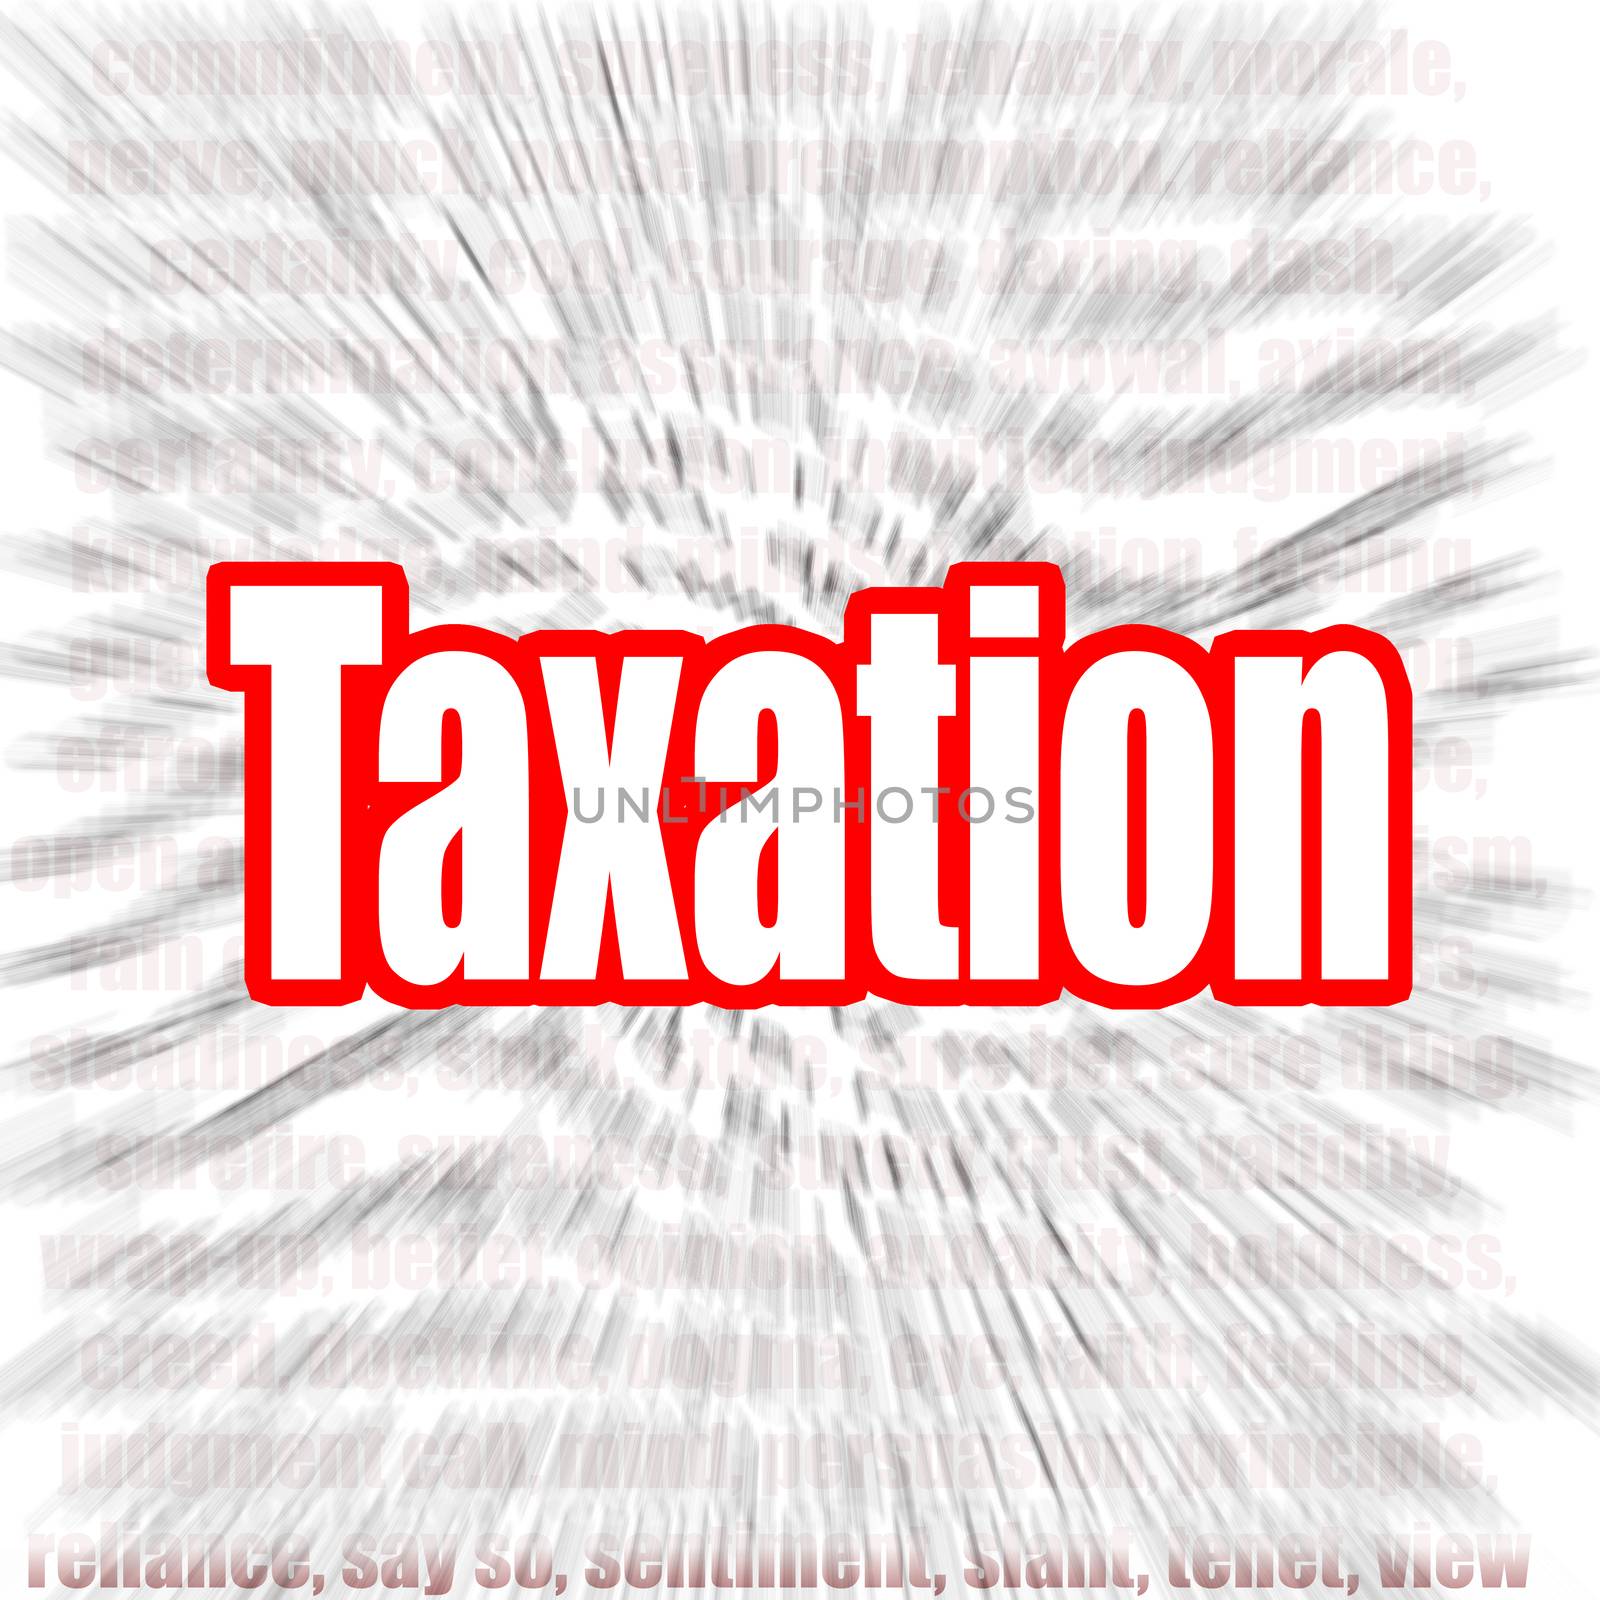 Taxation word with zoom in effect by tang90246